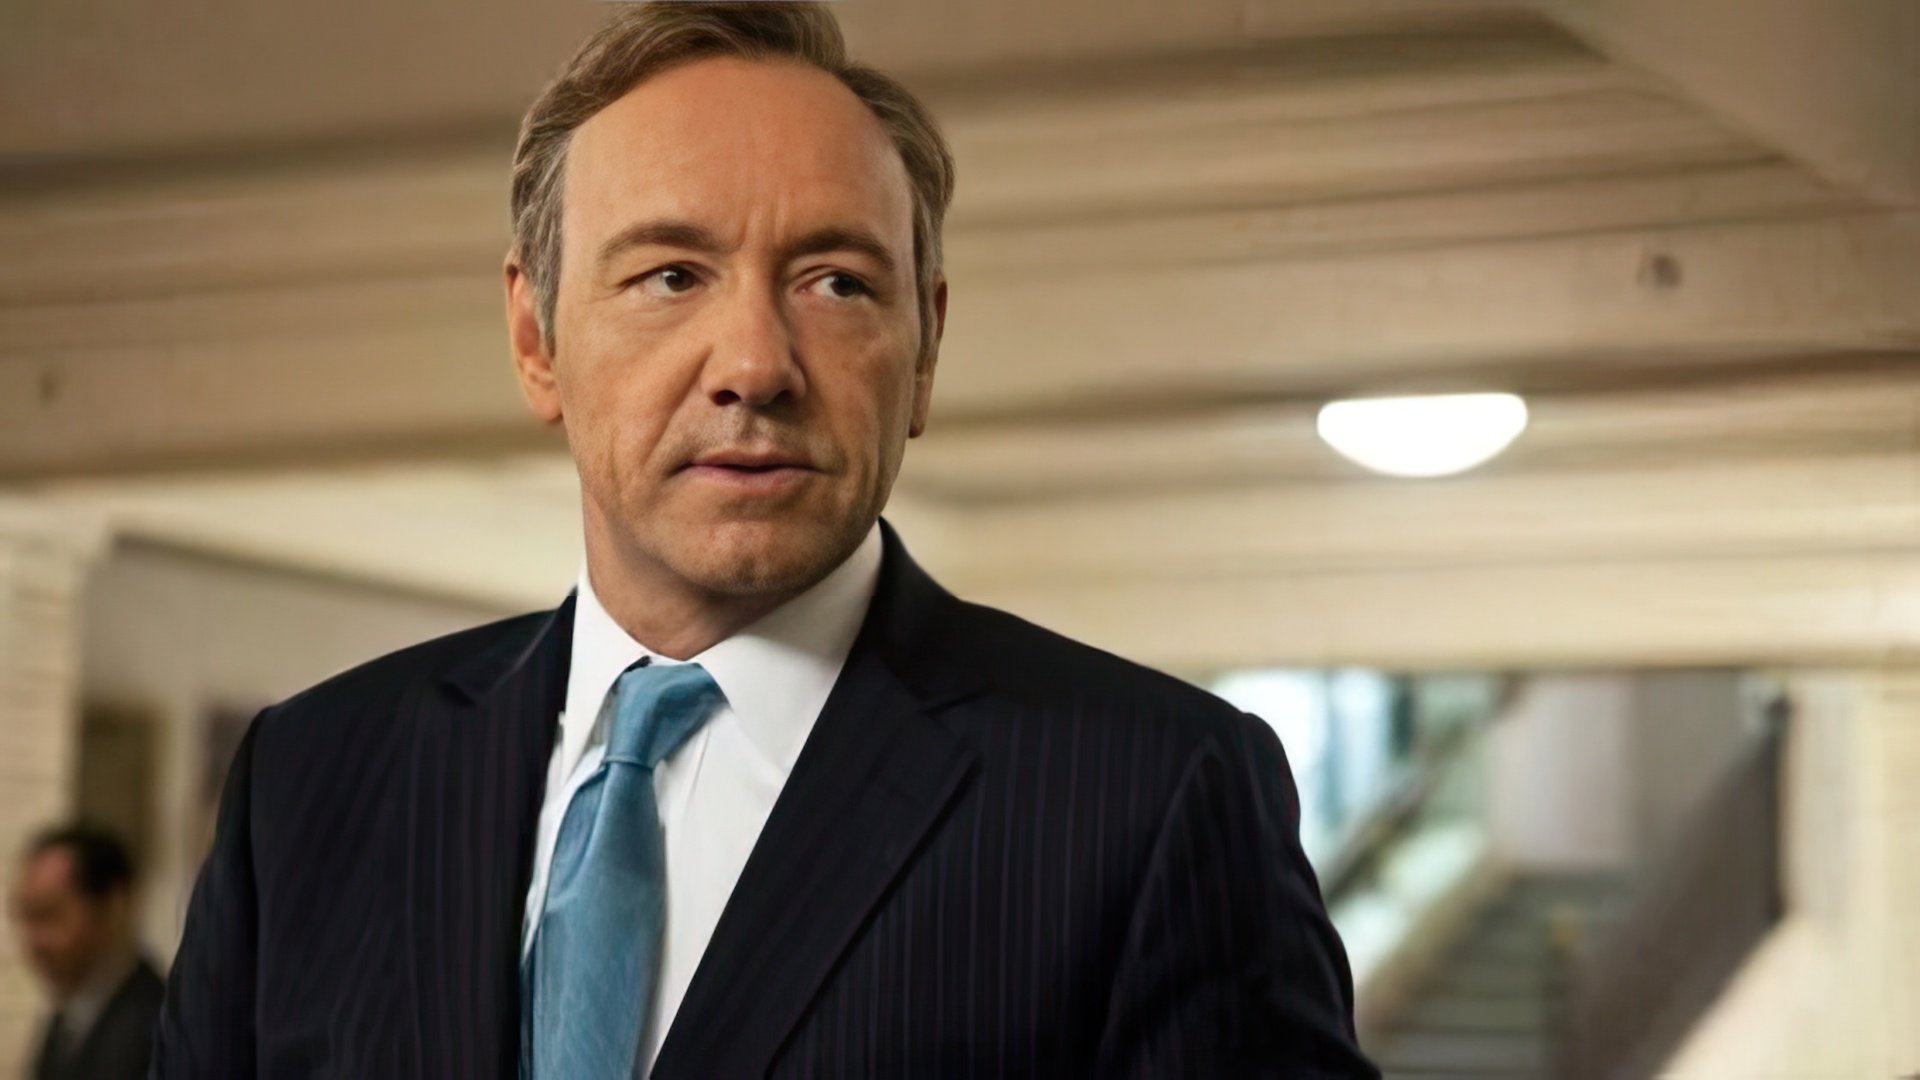 A 58-years old Kevin Spacey admitted being gay